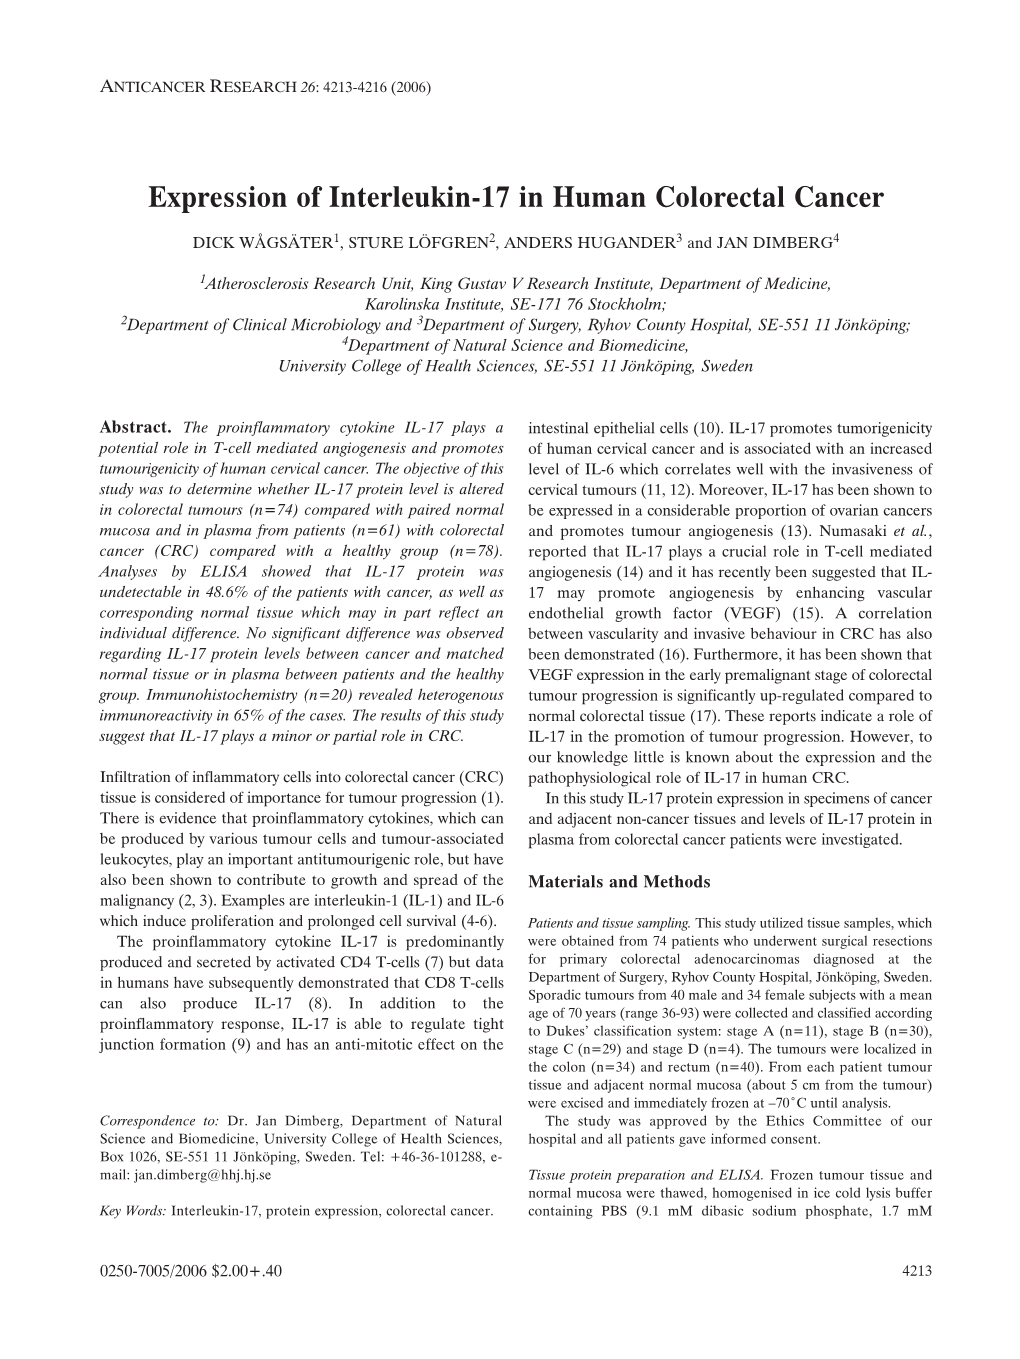 Expression of Interleukin-17 in Human Colorectal Cancer